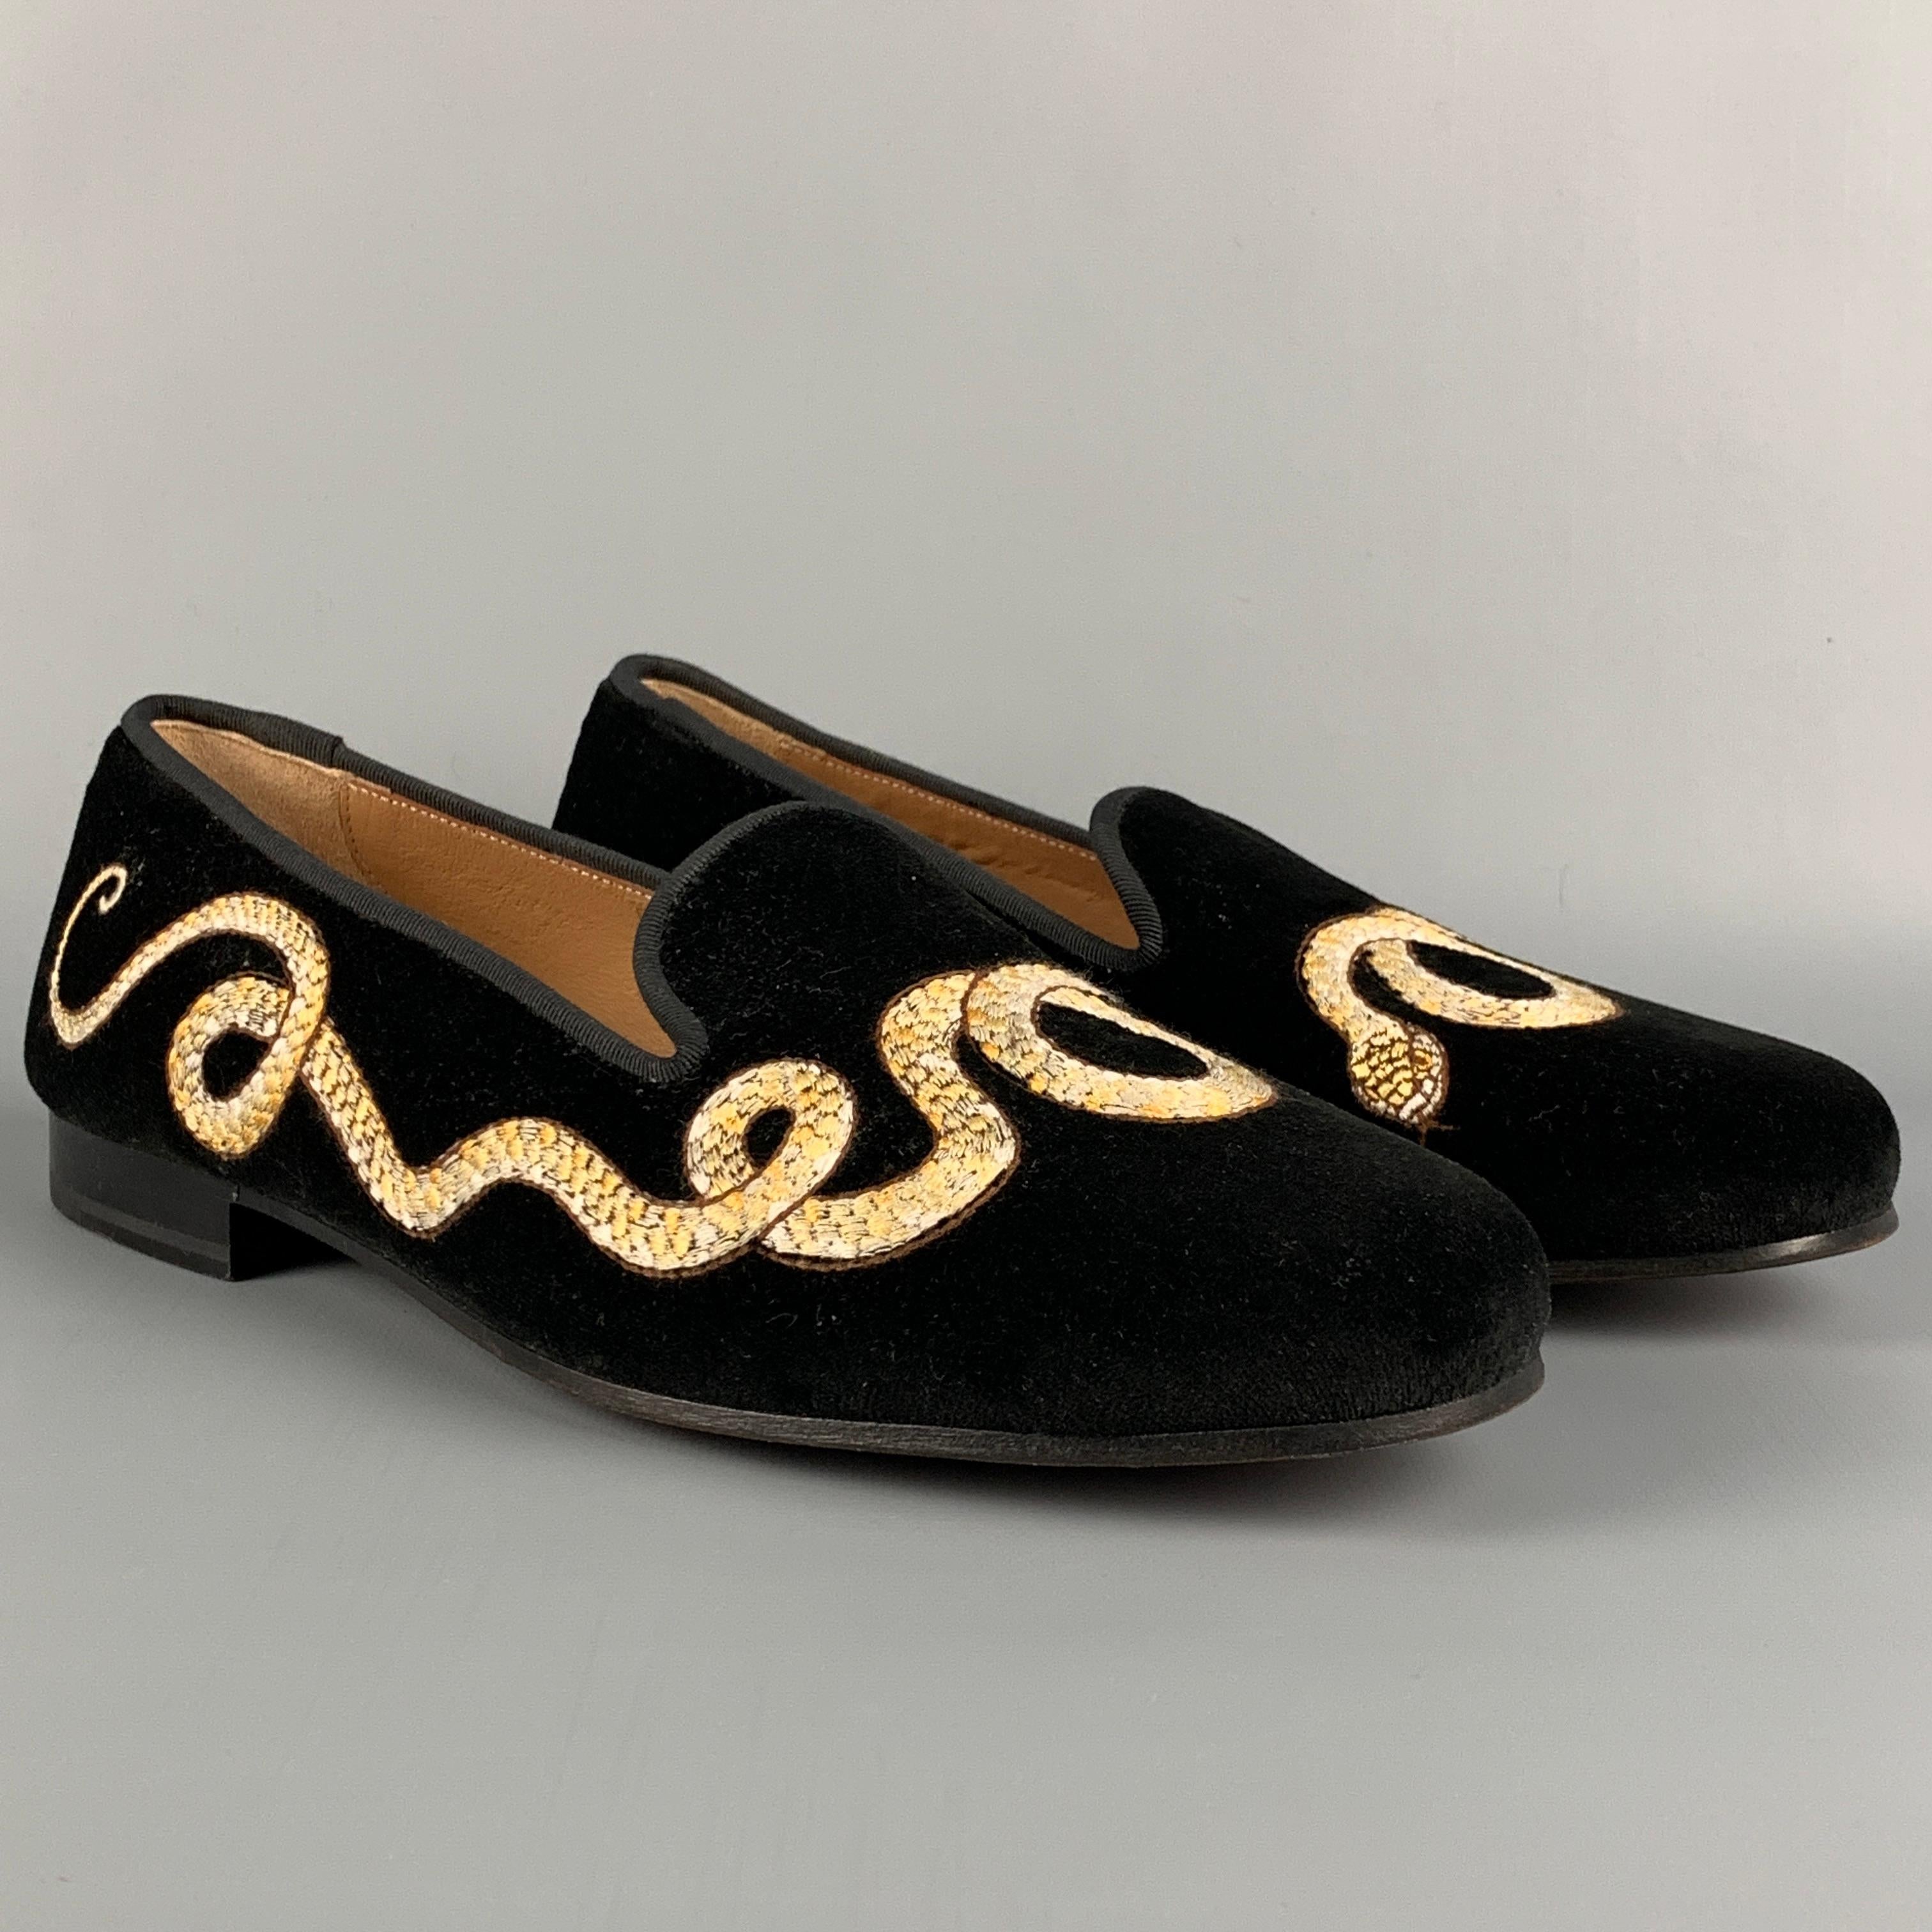 STUBBS & WOOTTON flats comes in a black velvet with a snake embroidered design featuring a slip on style and a leather sole. Made in Spain. 

Very Good Pre-Owned Condition.
Marked: 9

Outsole: 11 in. x 3.75 in. 